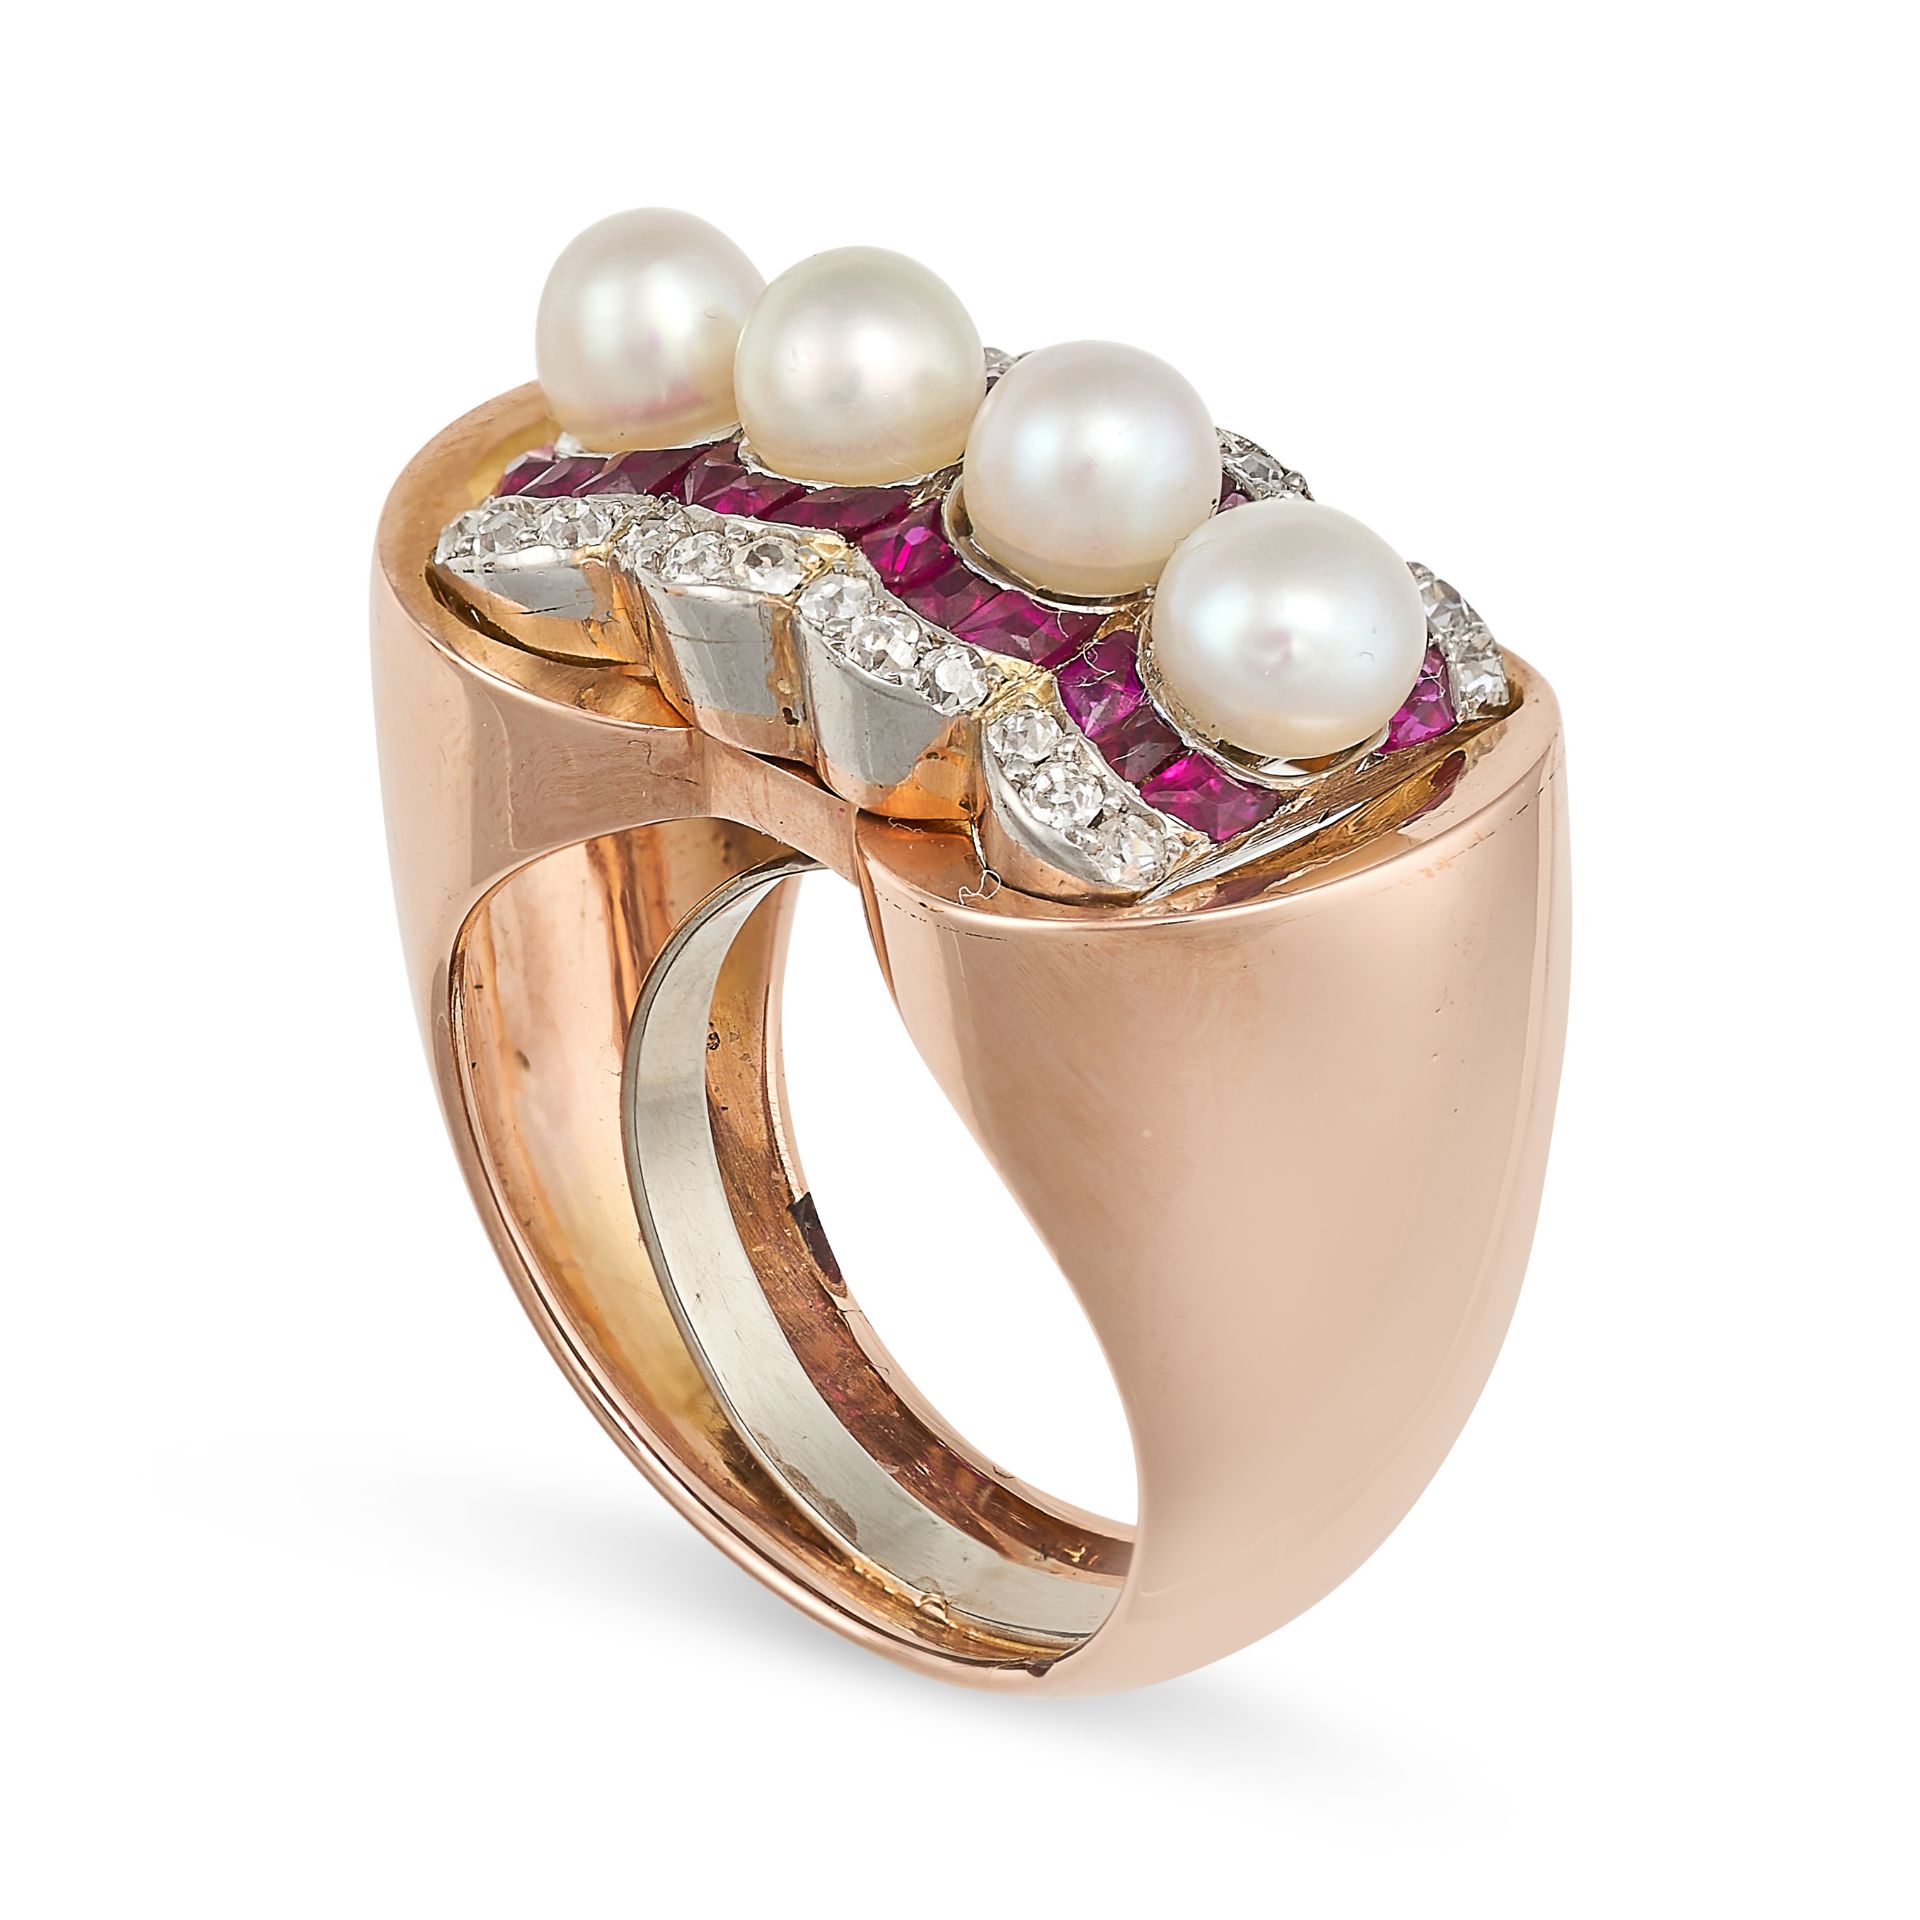 A RETRO PEARL, RUBY AND DIAMOND DRESS RING in rose and white gold, set with four pearls accented - Image 2 of 2